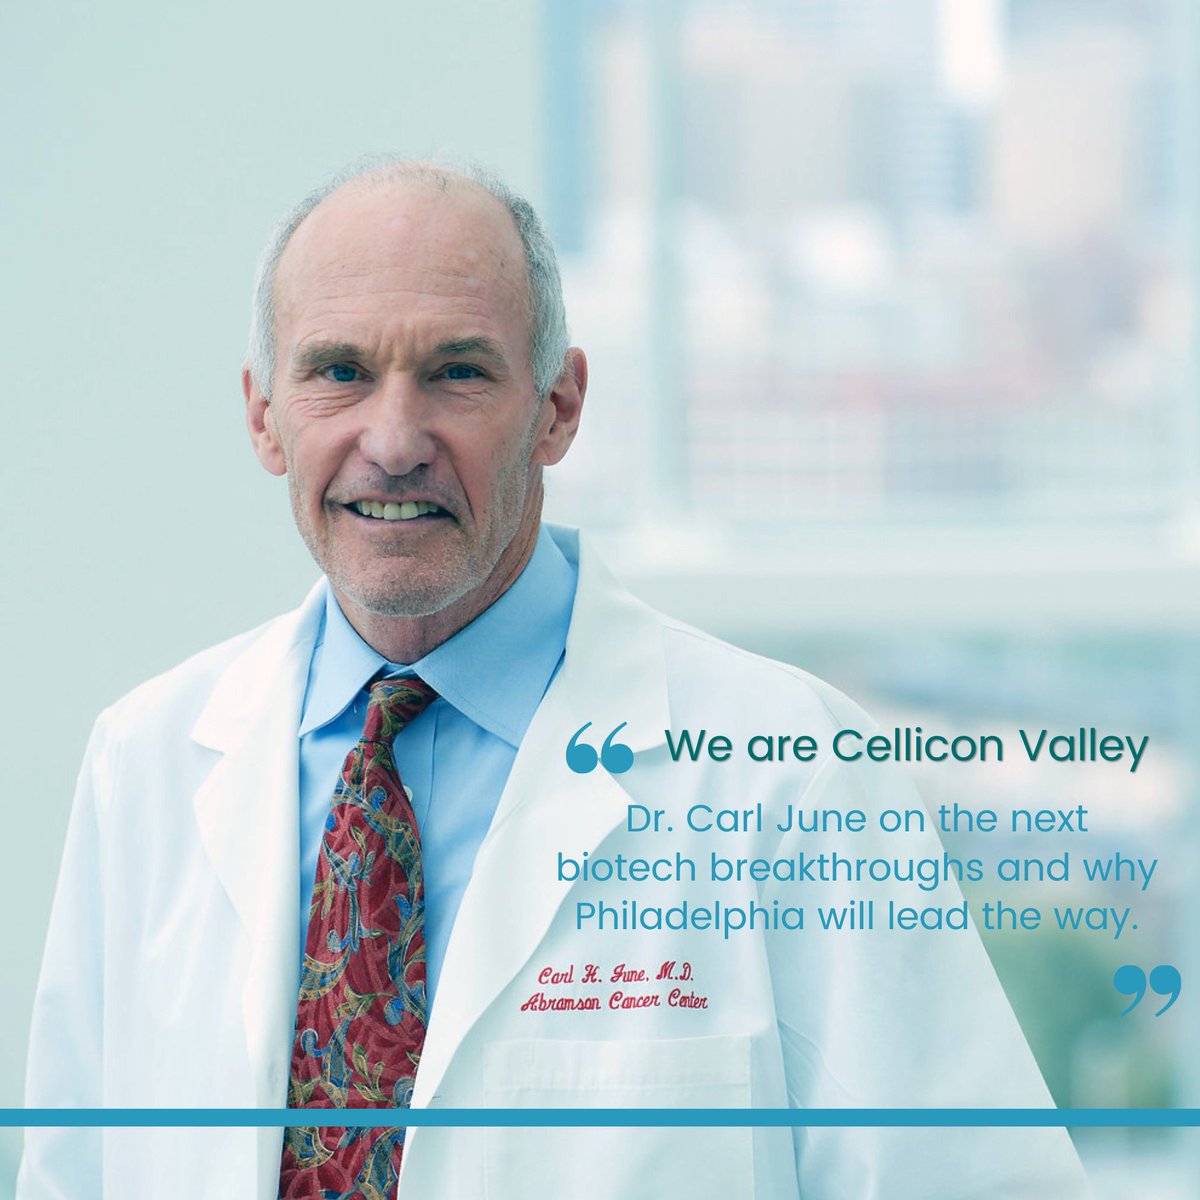 Discover Dr. June's insights on Philadelphia's biotech rise and its impact on Penn. A dynamic hub, Penn University is now a thriving biotech incubator, attracting talent back into the fold. 

lnkd.in/eJDqZ8EA

Image from: Penn Today

#CELLICONVALLEY #BiotechInnovation